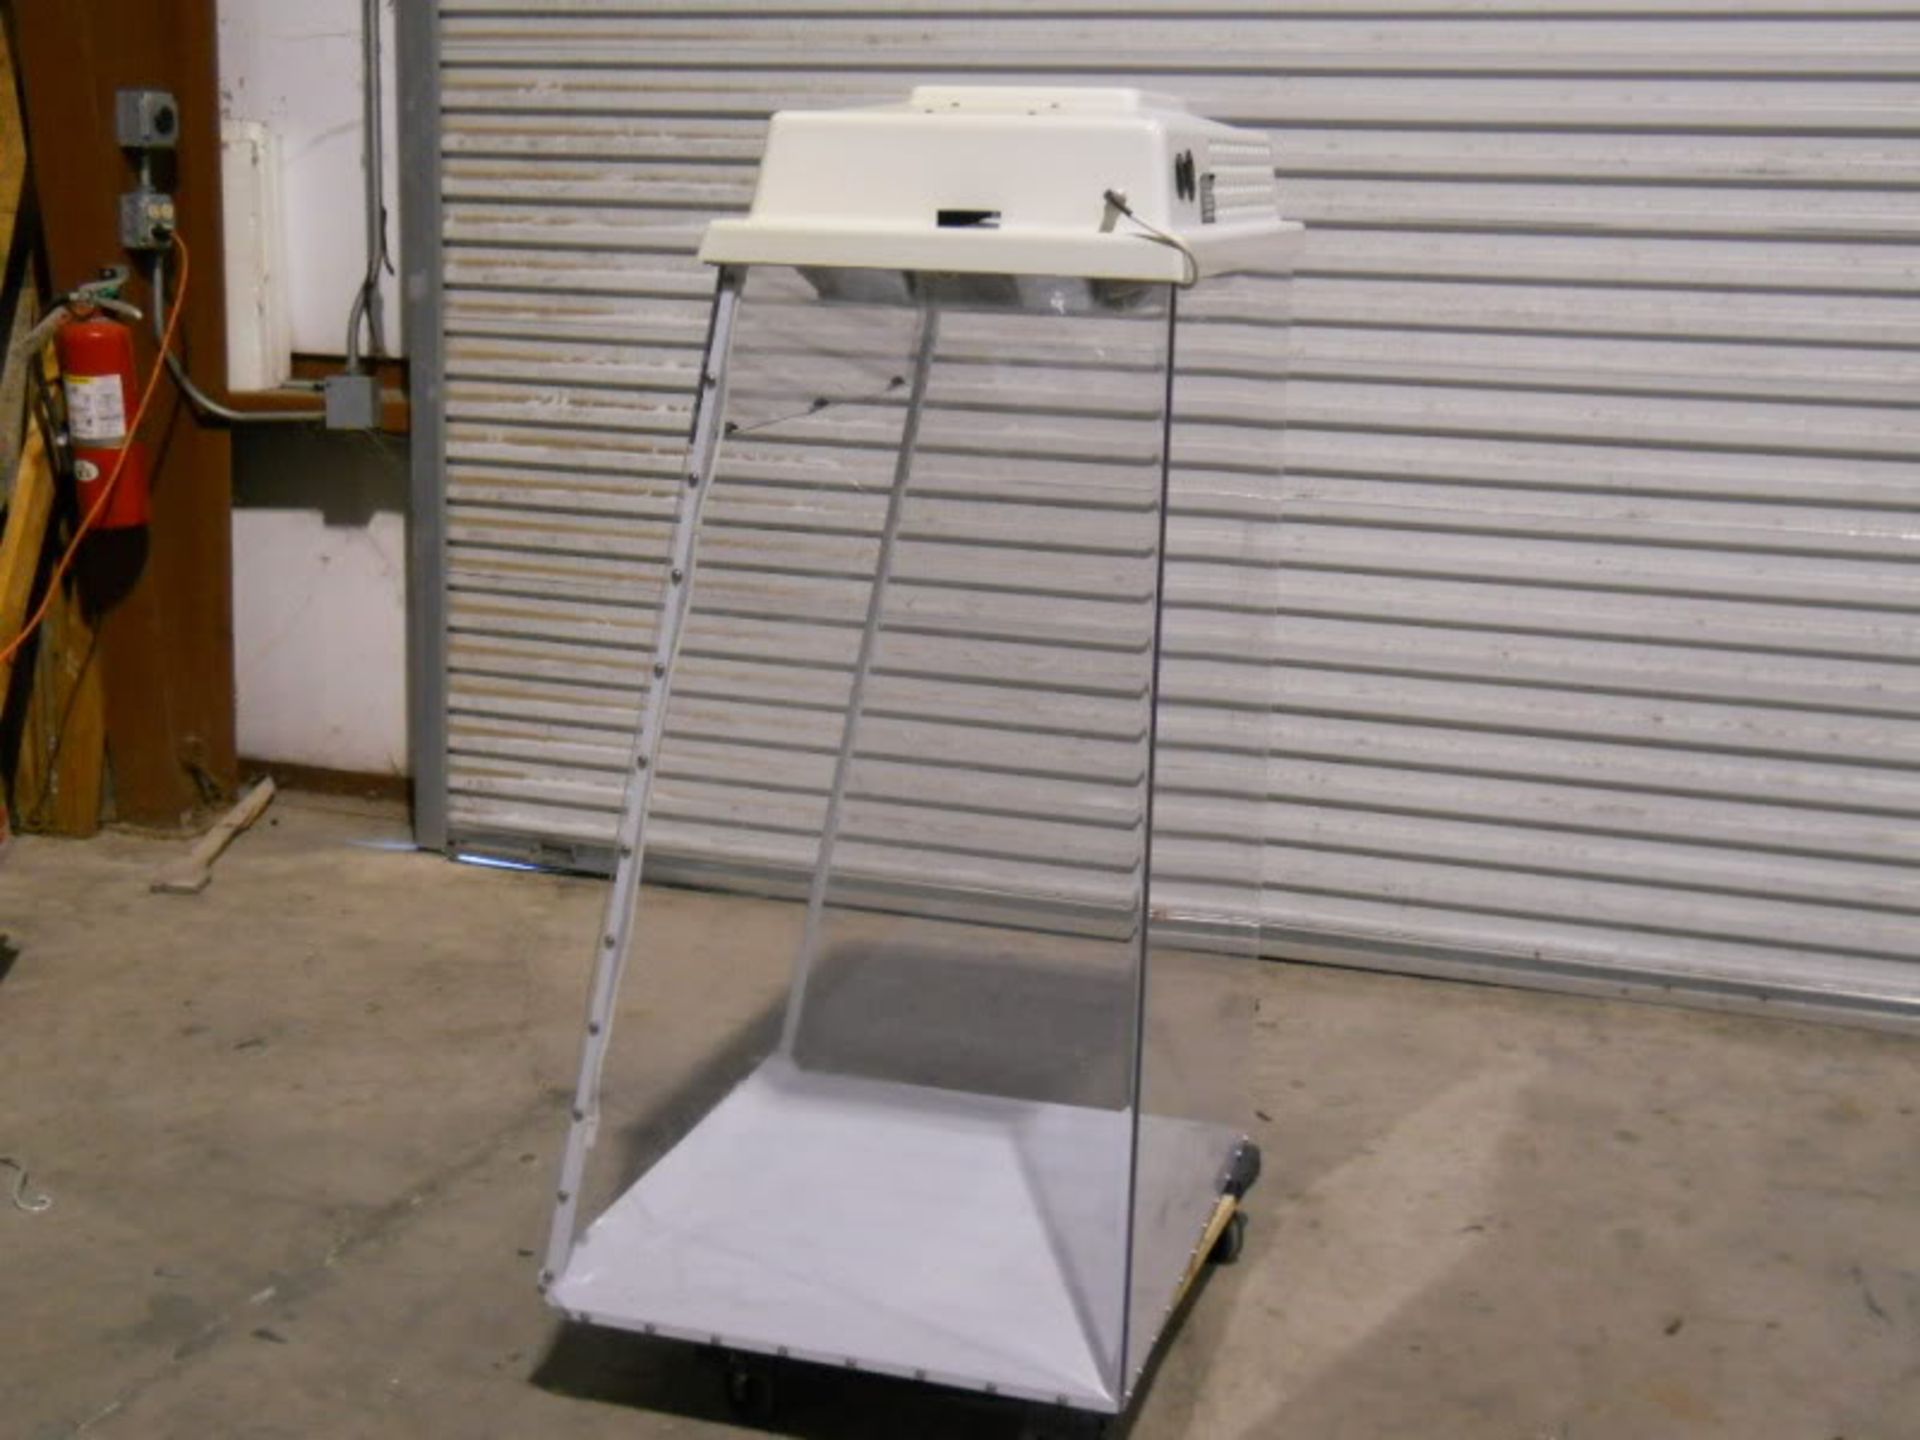 AirClean 600 Workstation "Air Clean Systems" Model AC600T, Qty 1, 330803694641 - Image 4 of 7